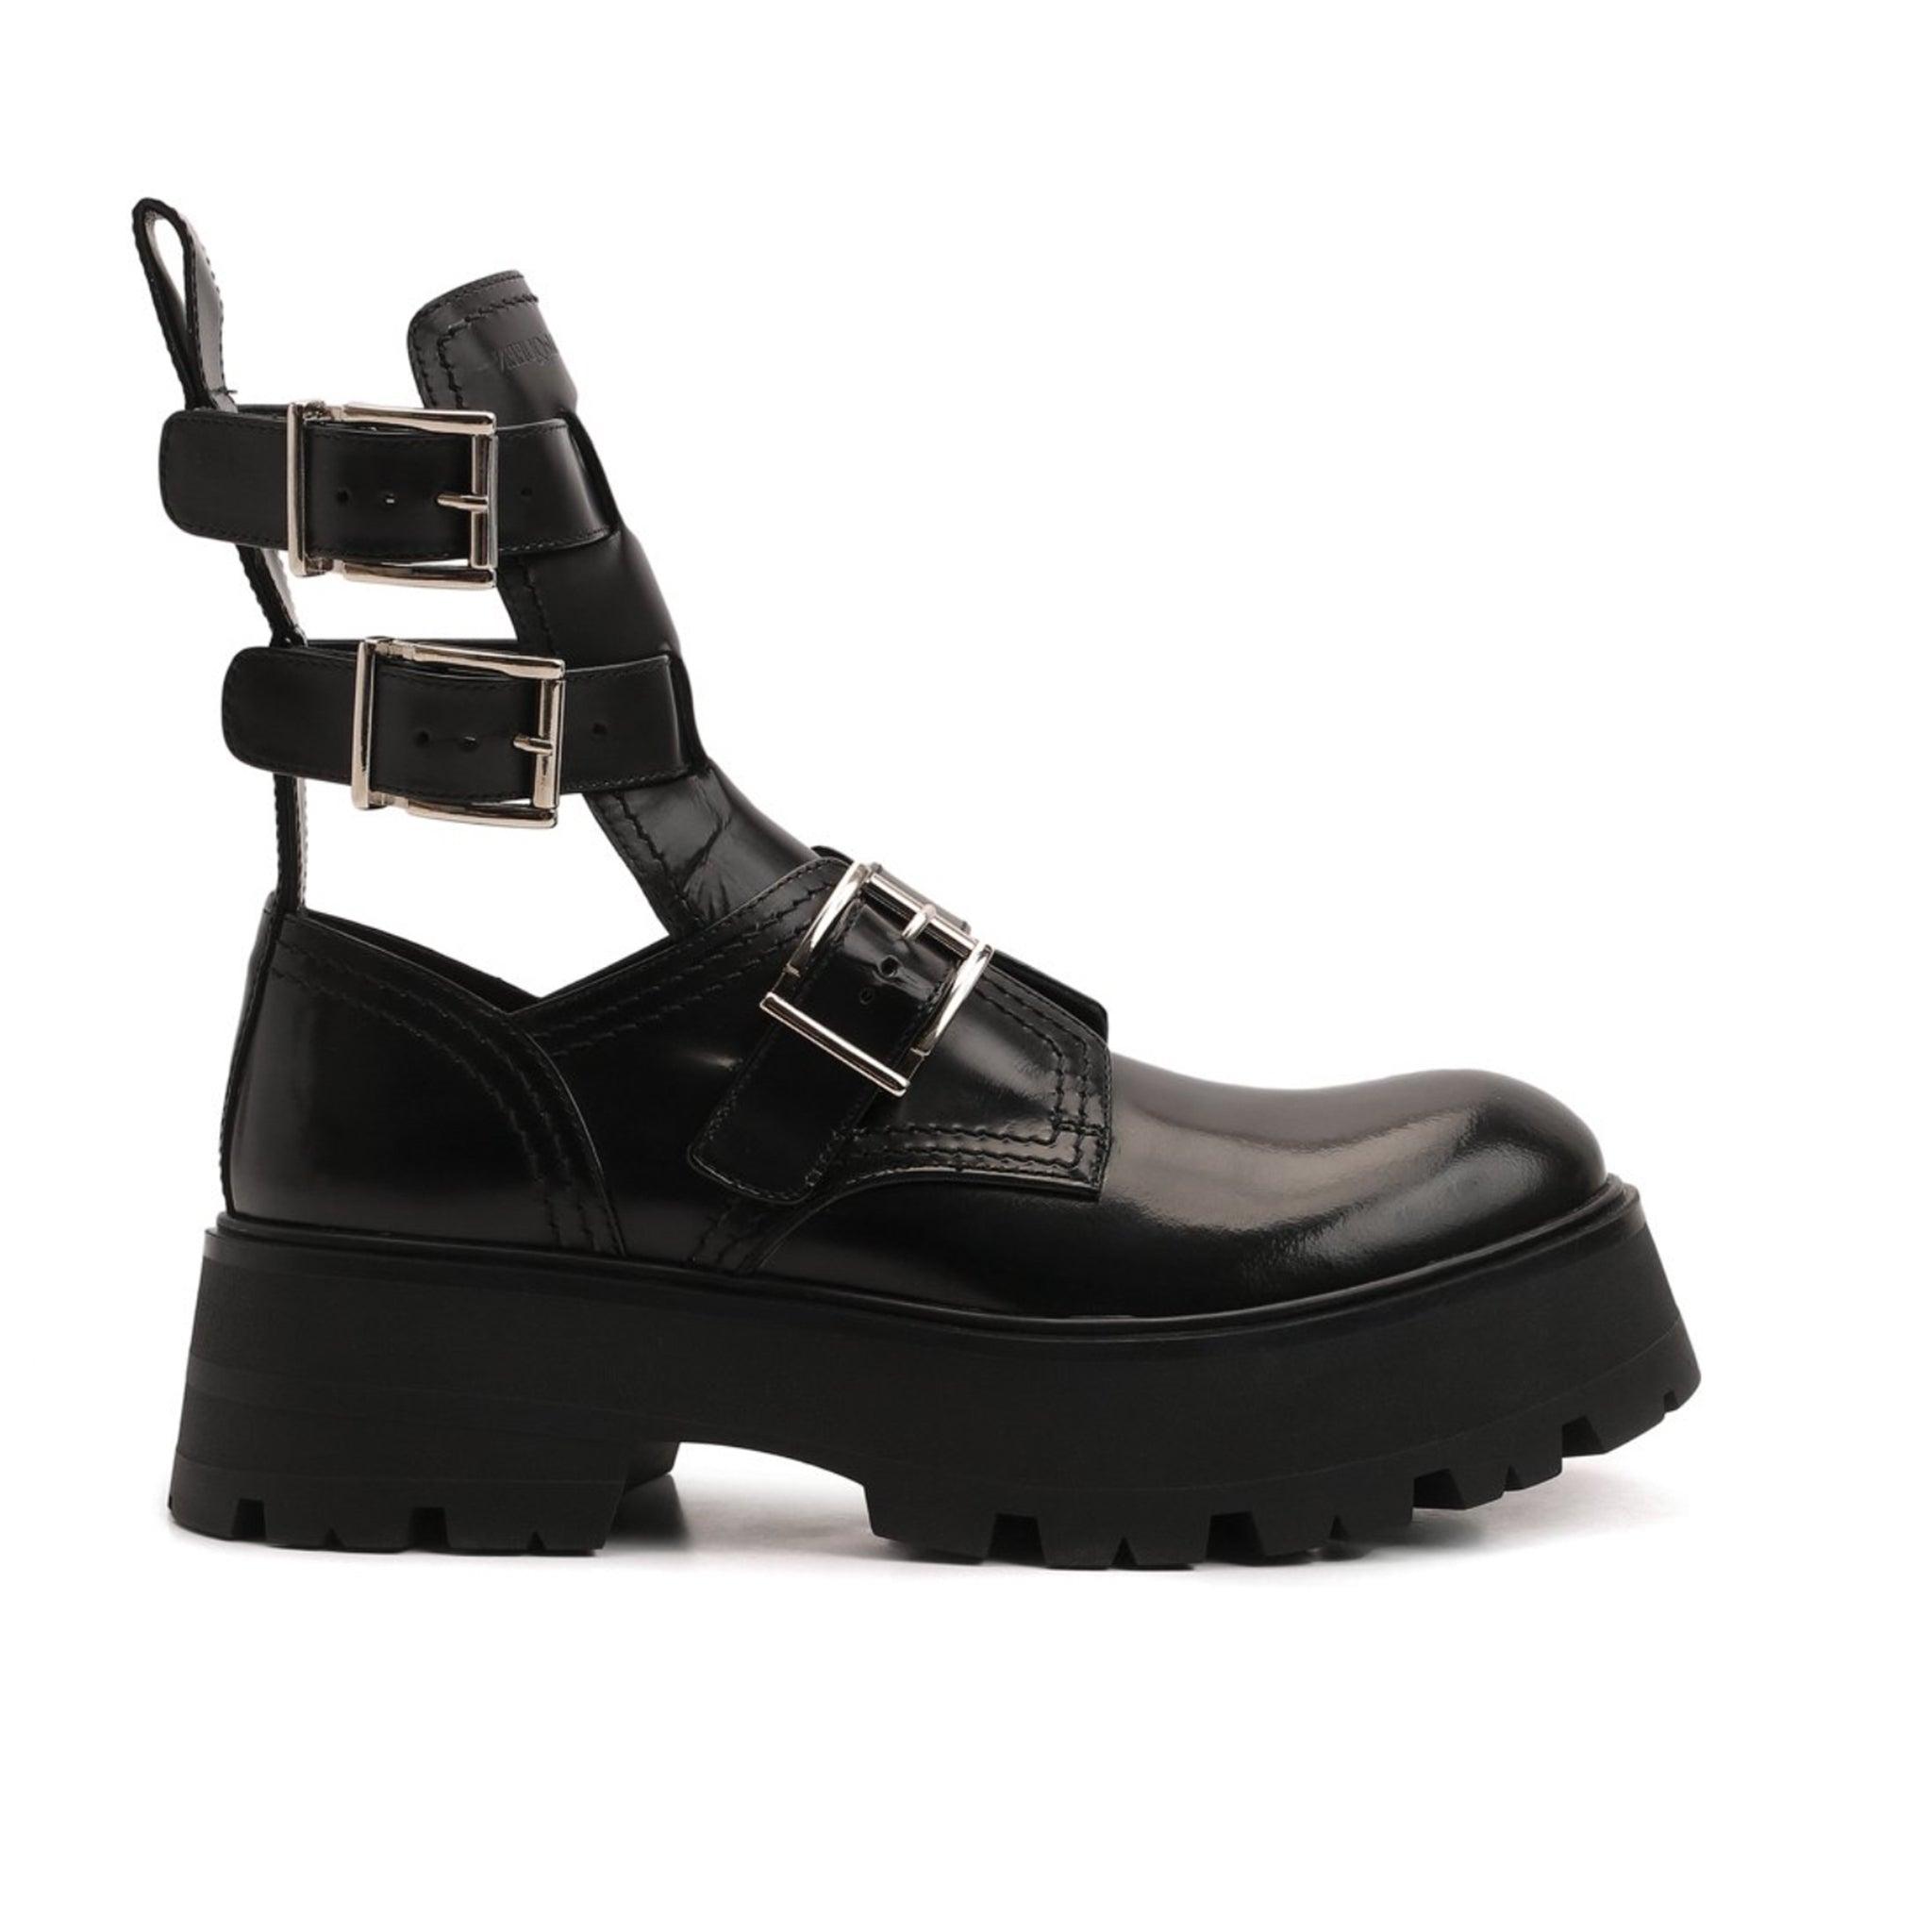 Alexander McQueen Rave Leather Boots in Black | Lyst